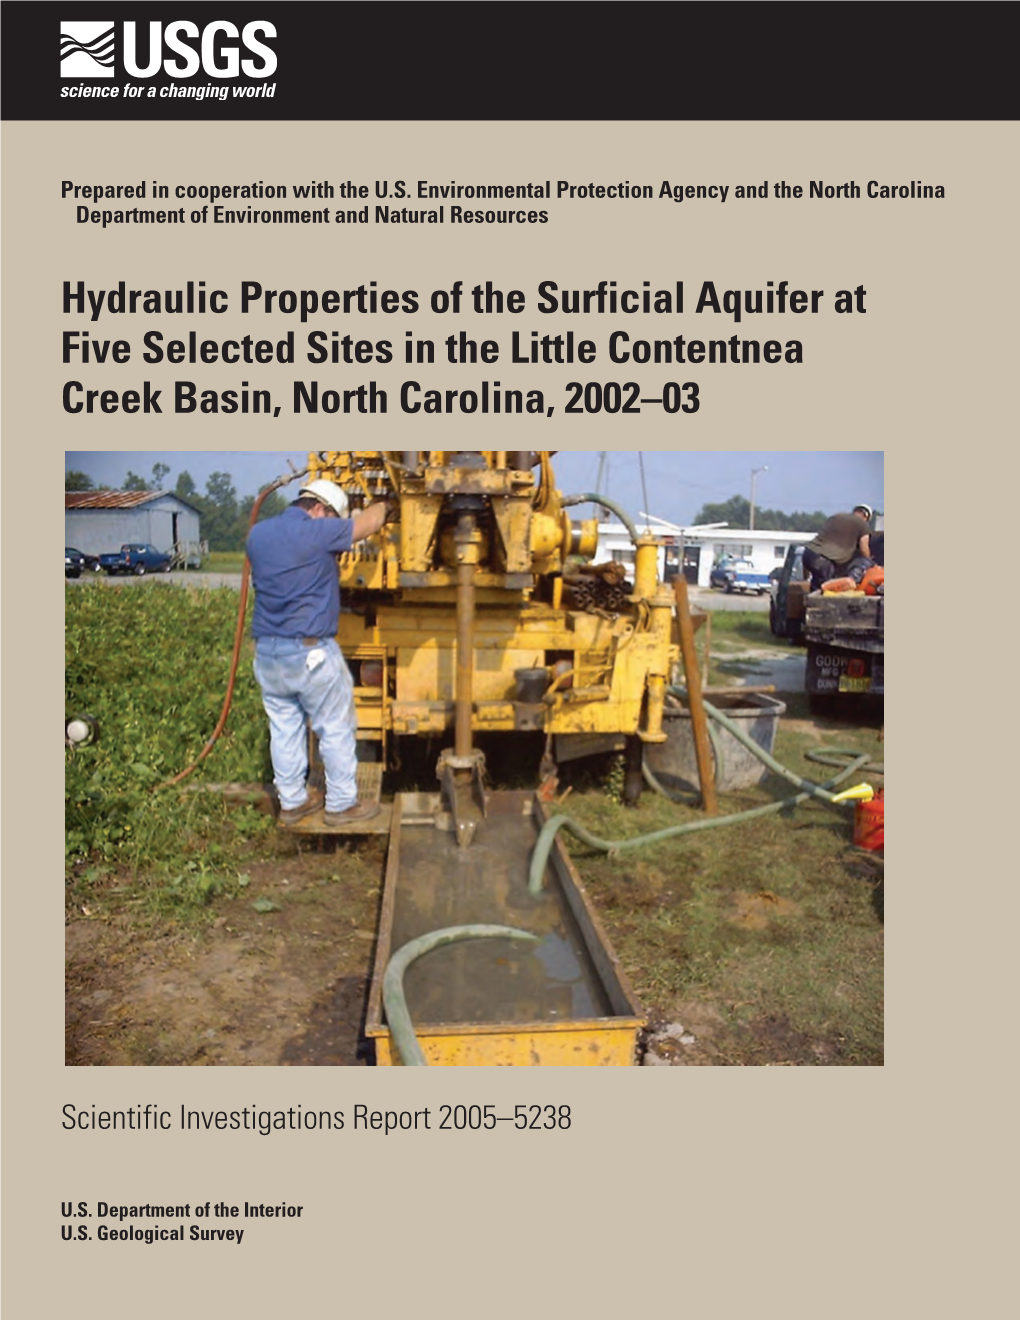 Hydraulic Properties of the Surficial Aquifer at Five Selected Sites in the Little Contentnea Creek Basin, North Carolina, 2002–03